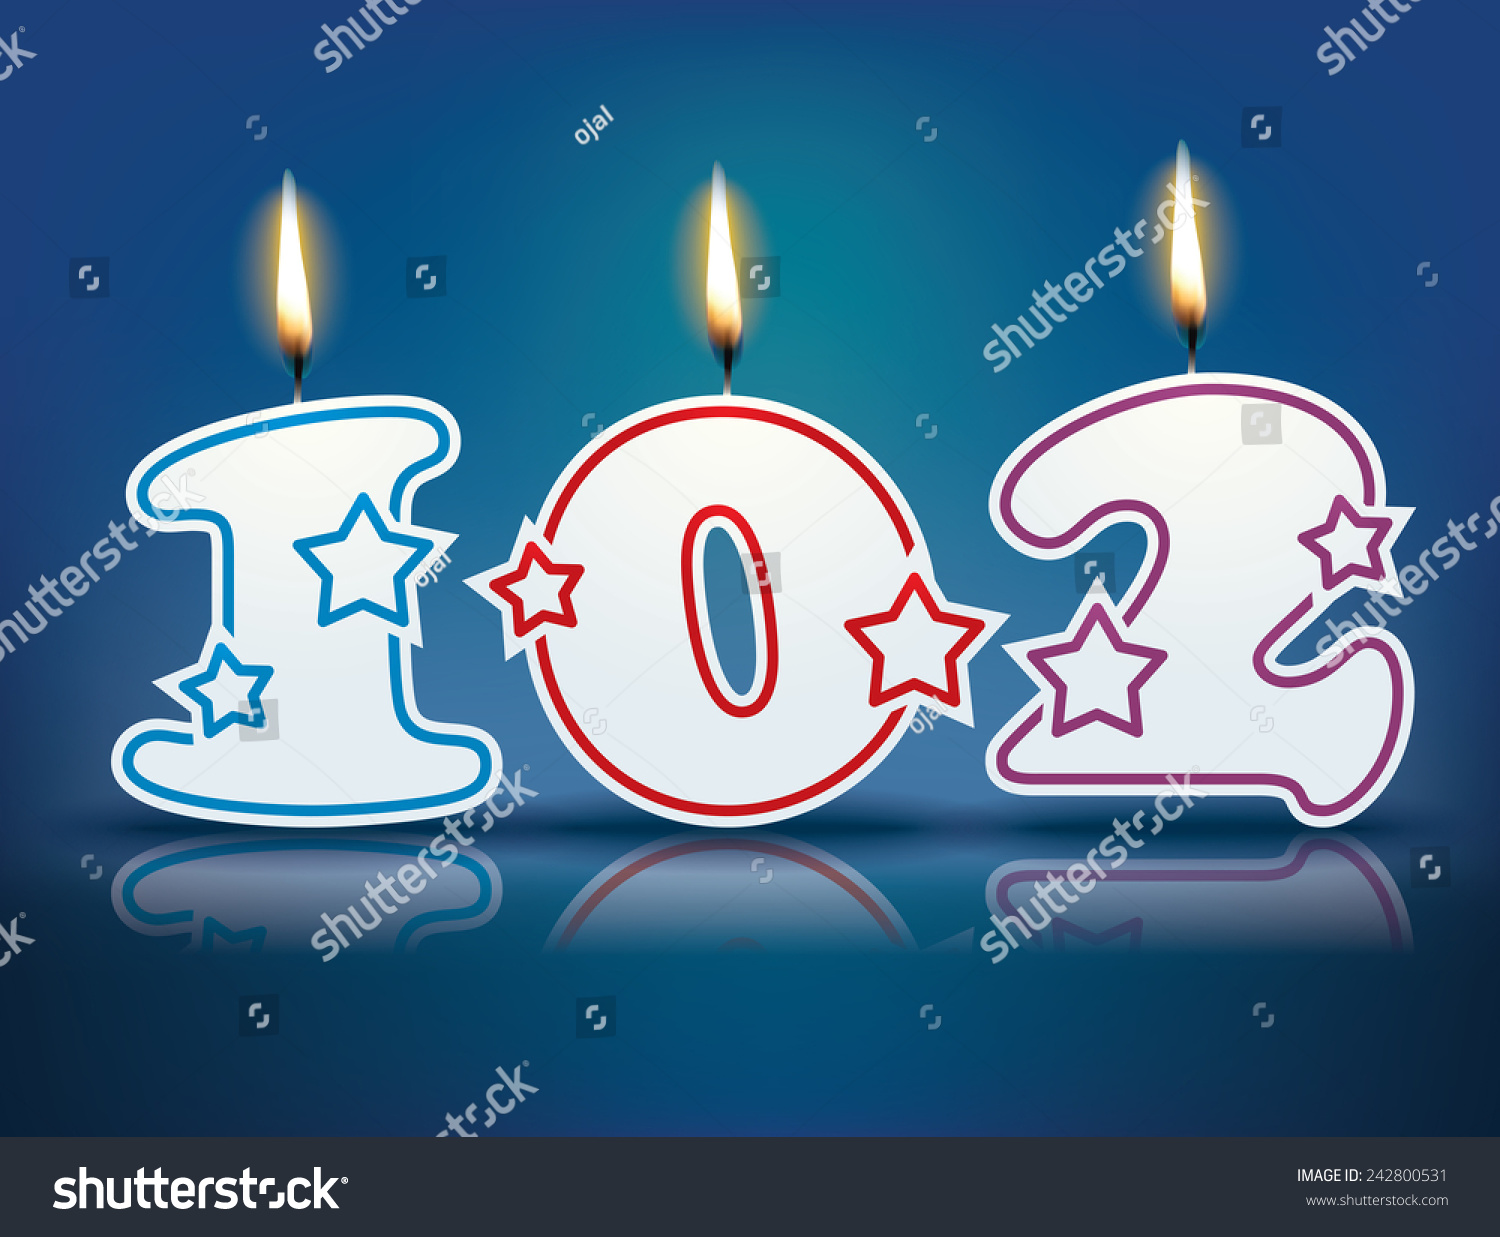 SVG of Birthday candle number 102 with flame - eps 10 vector illustration svg